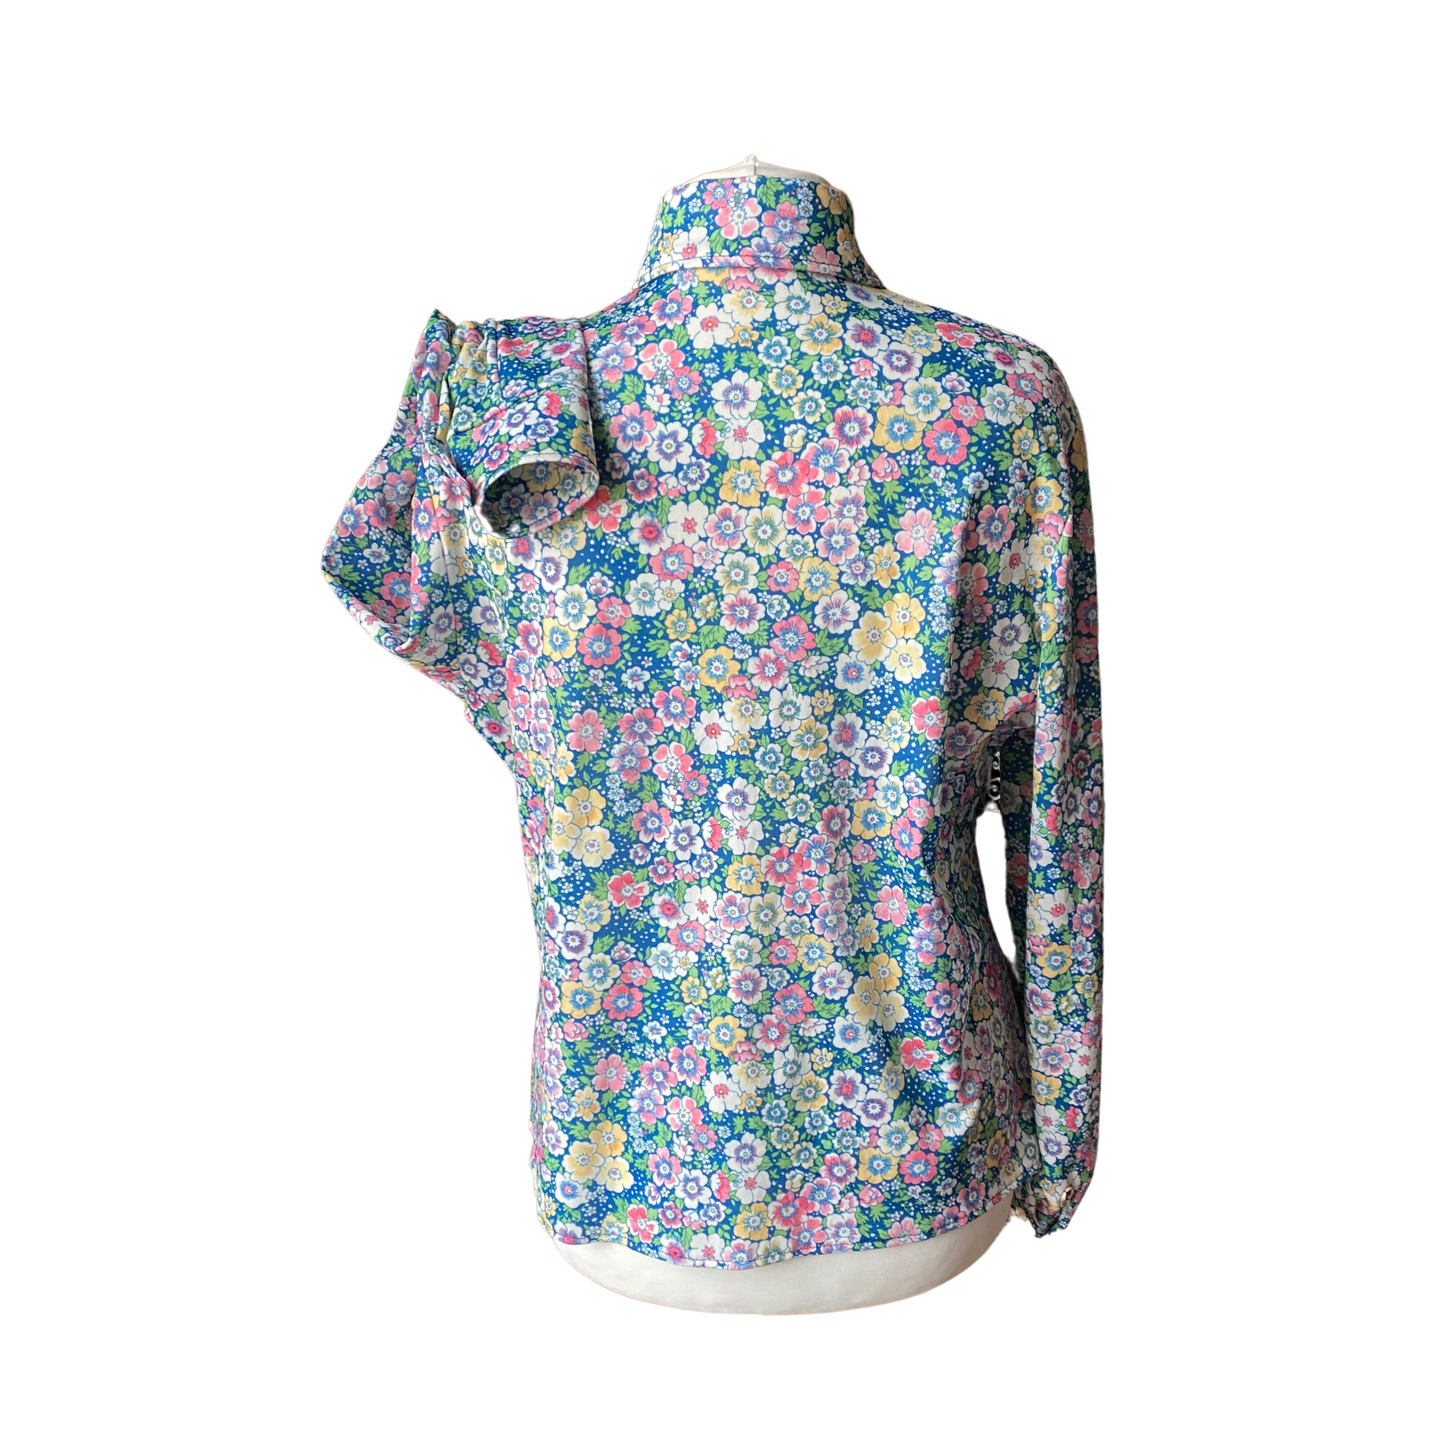 Versatile flower print vintage blouse - pair with skirts or jeans for a chic look